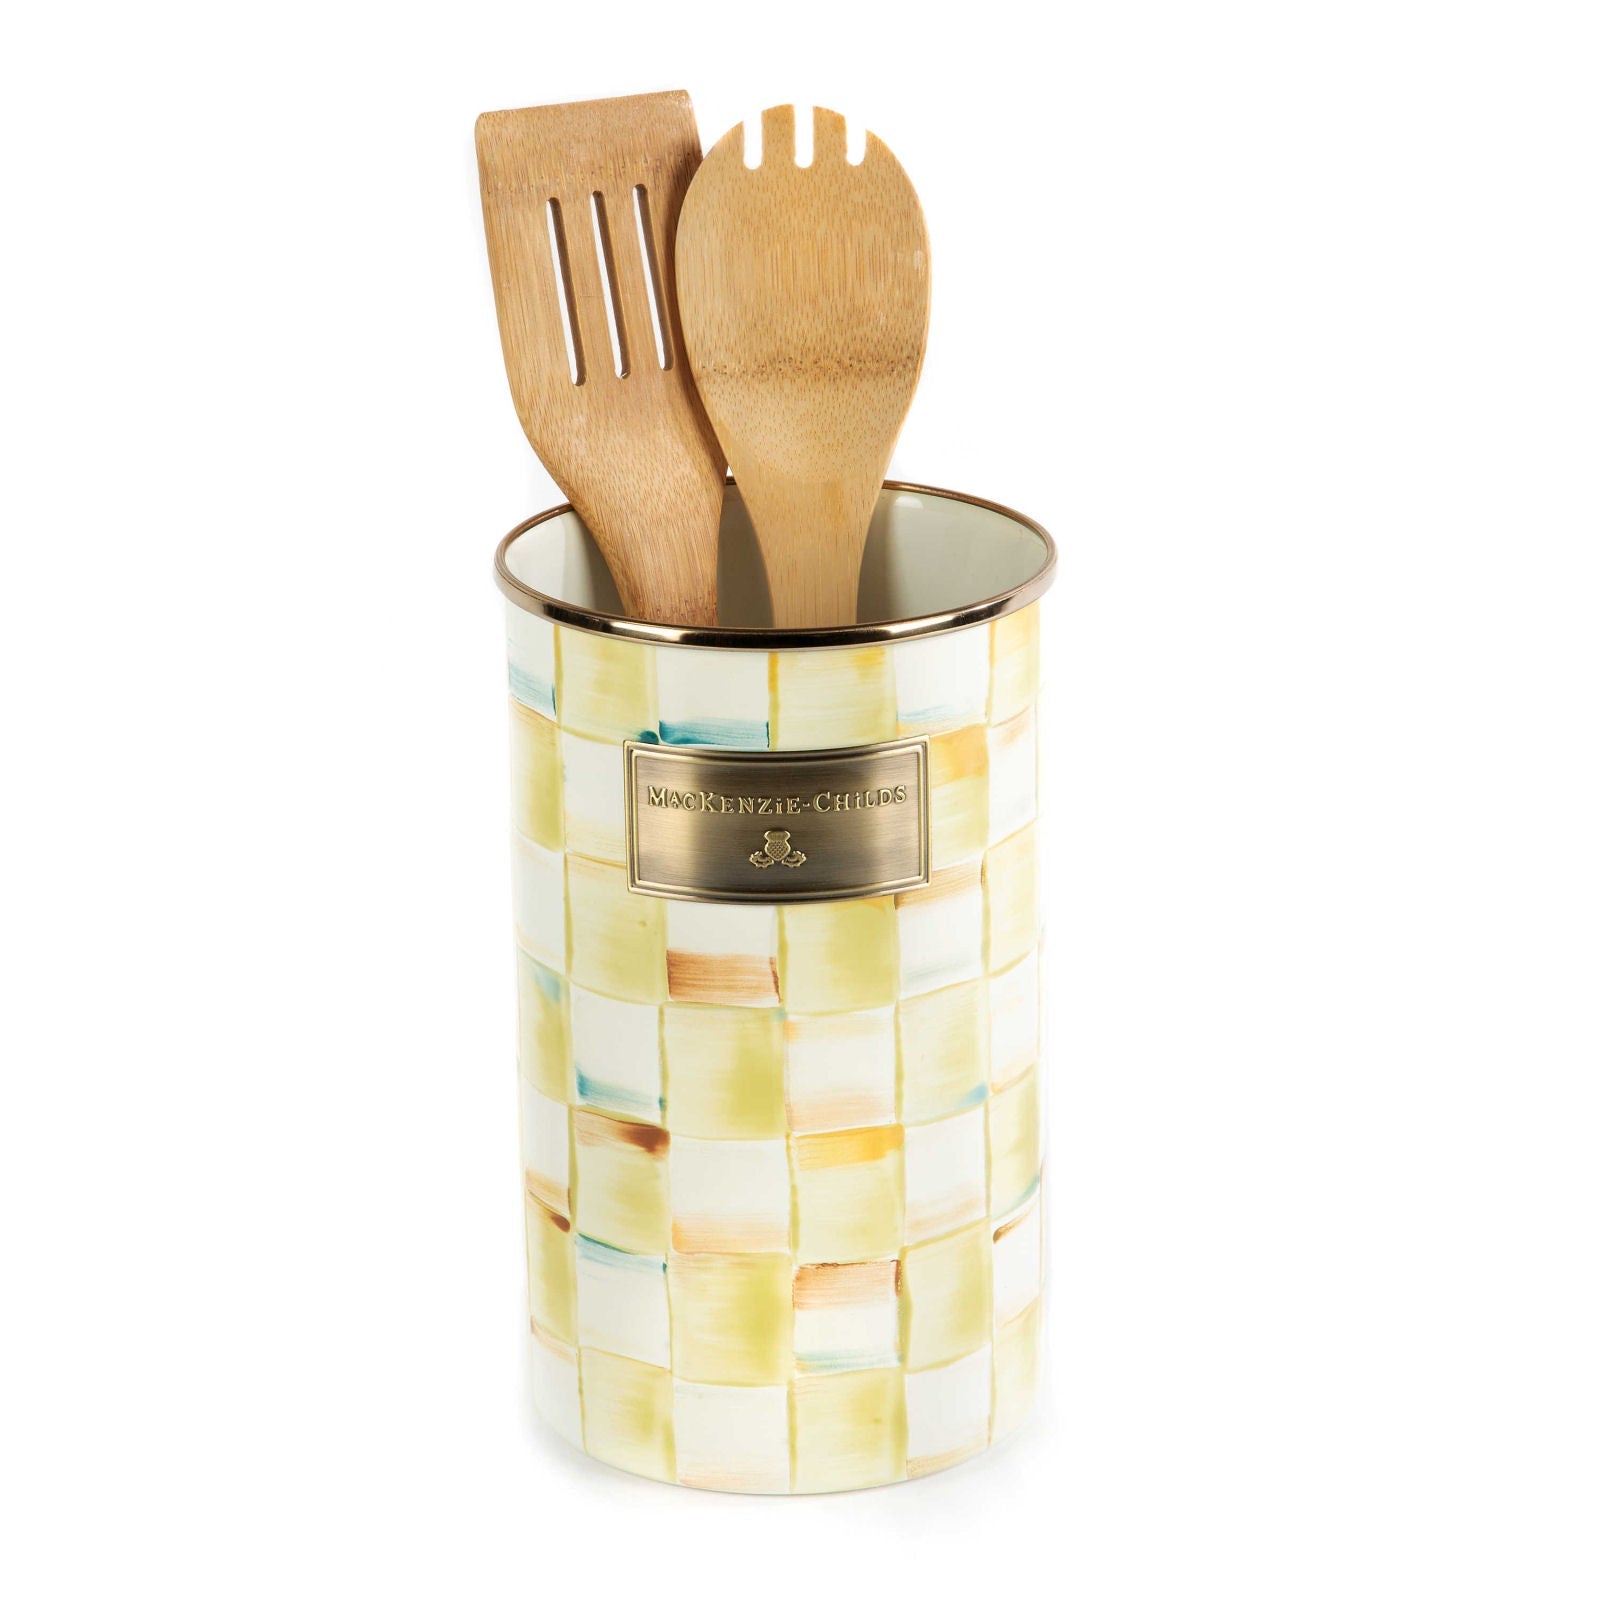 Parchment Check Enamel Utensil Holder by Mackenzie-Childs - |VESIMI Design| Luxury and Rustic bathrooms online